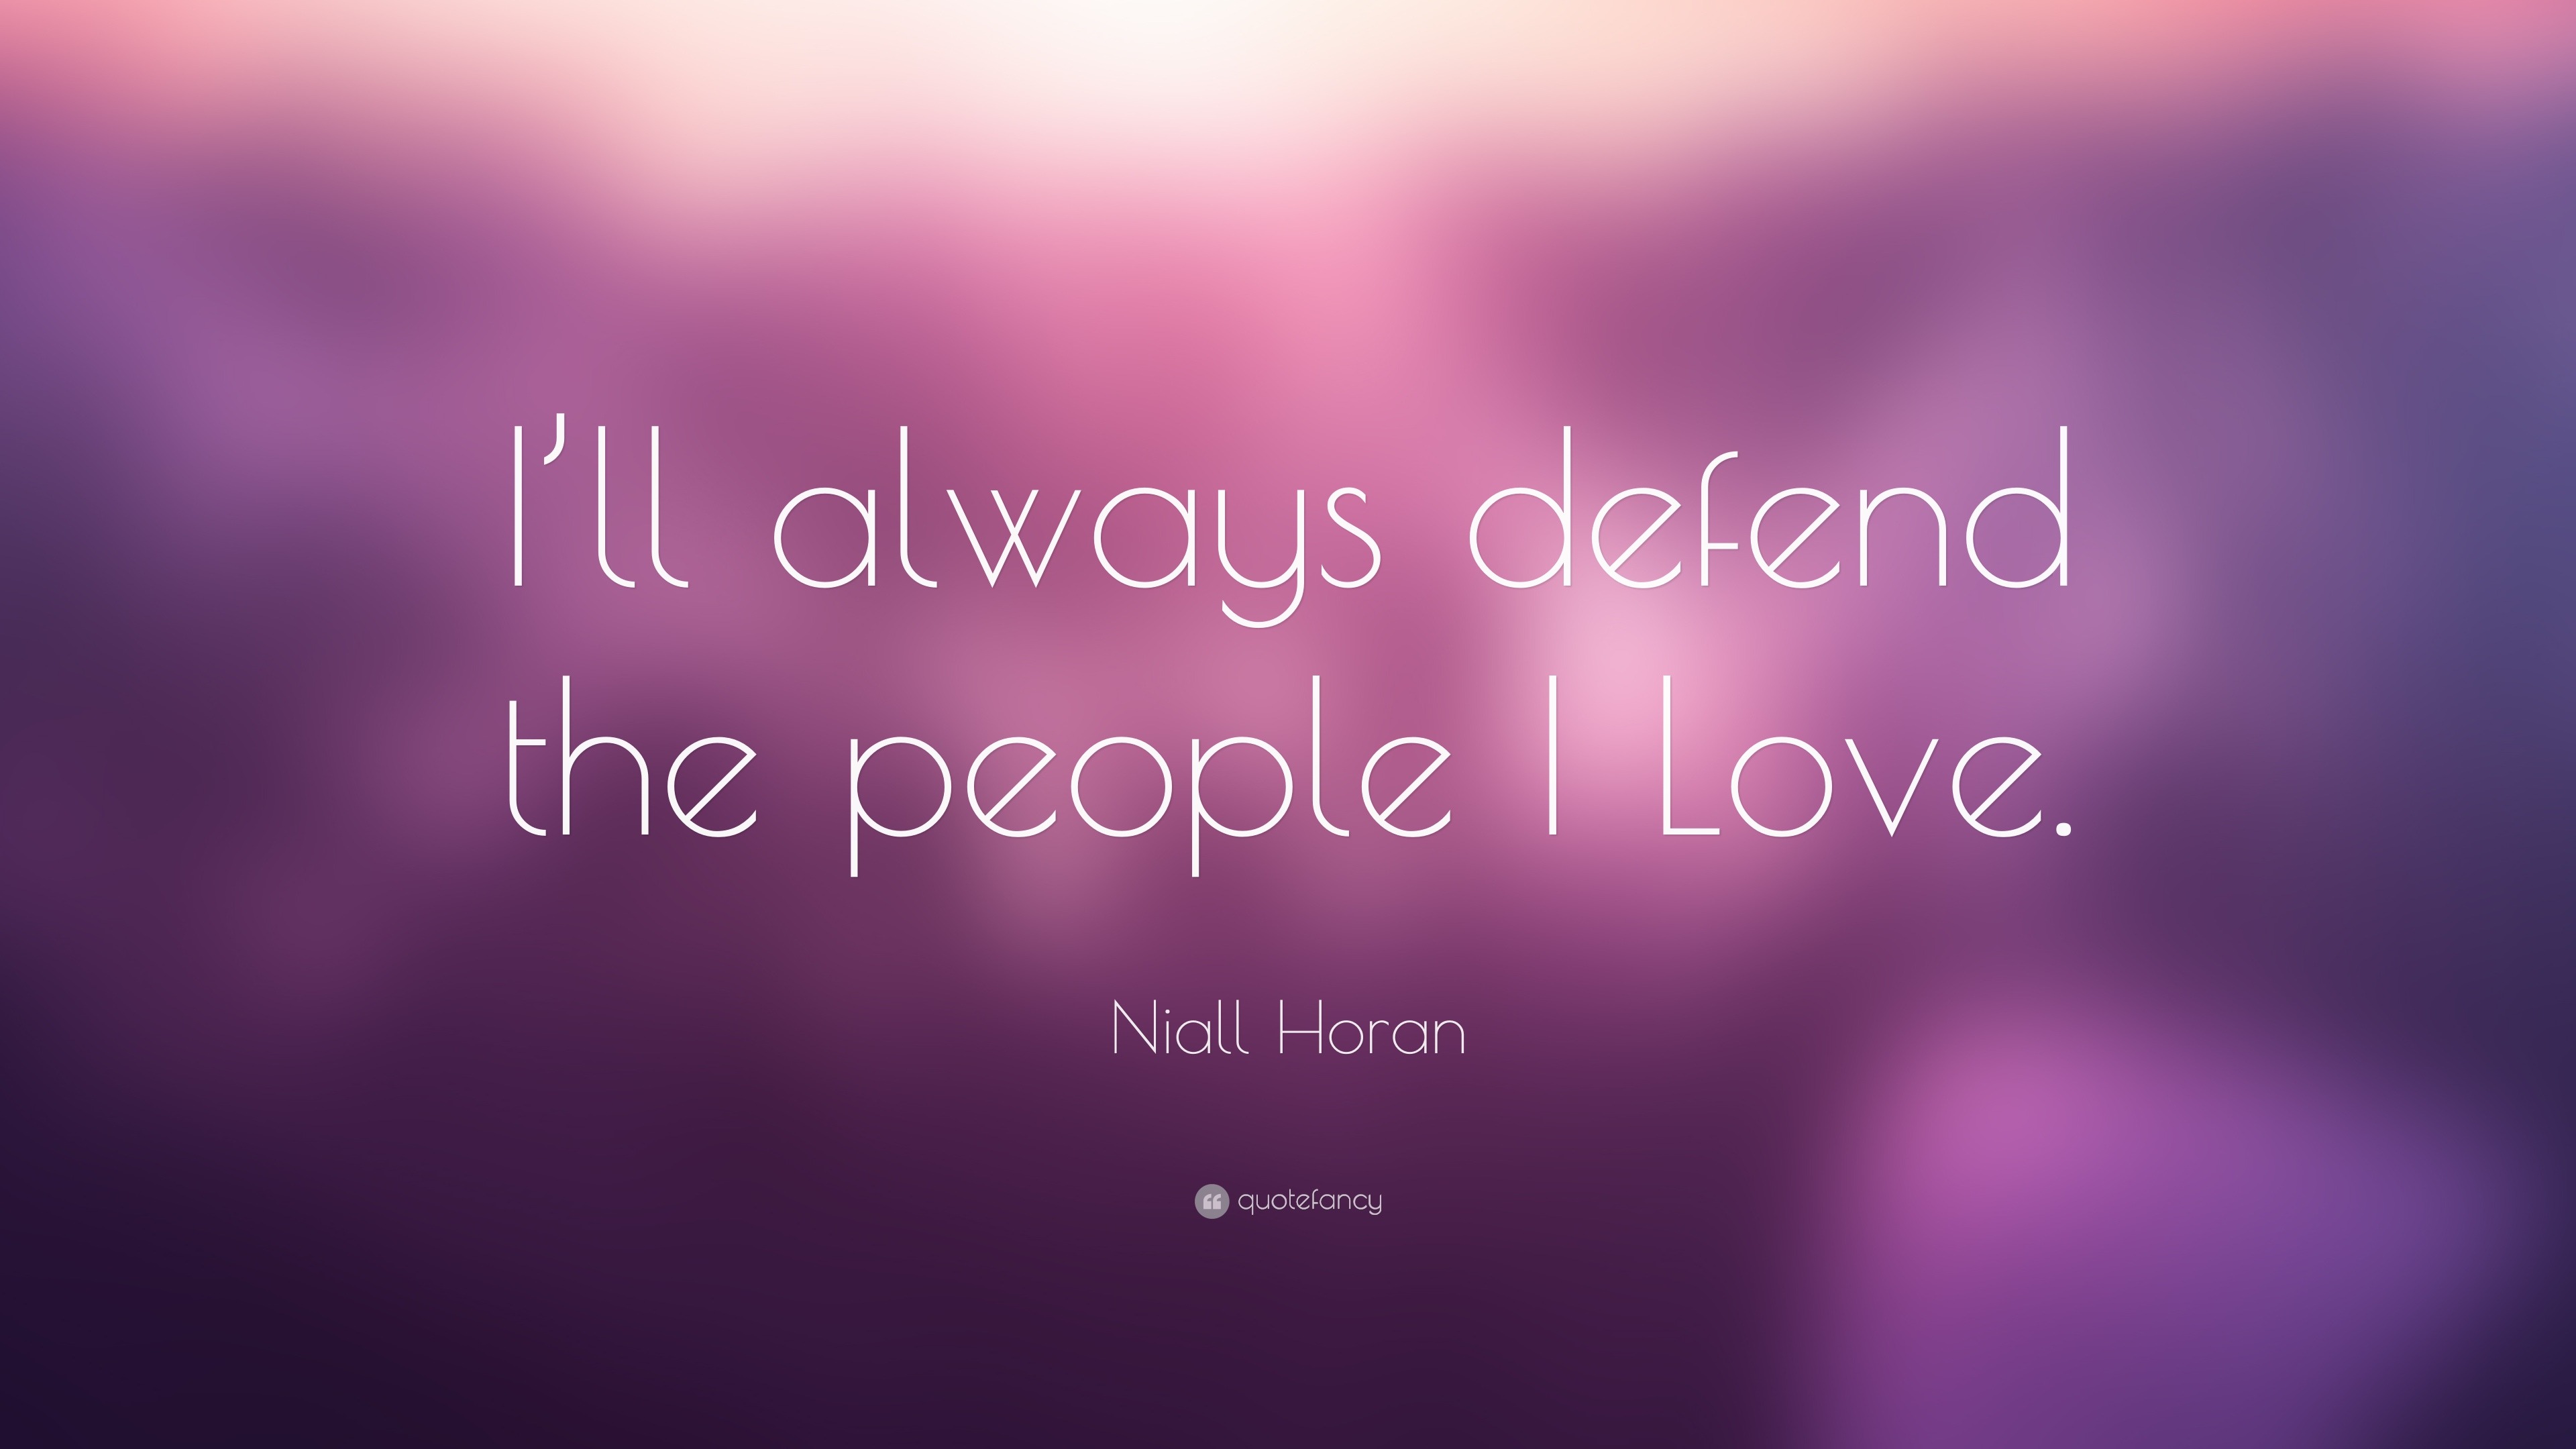 Niall Horan Quote: “I’ll always defend the people I Love.”